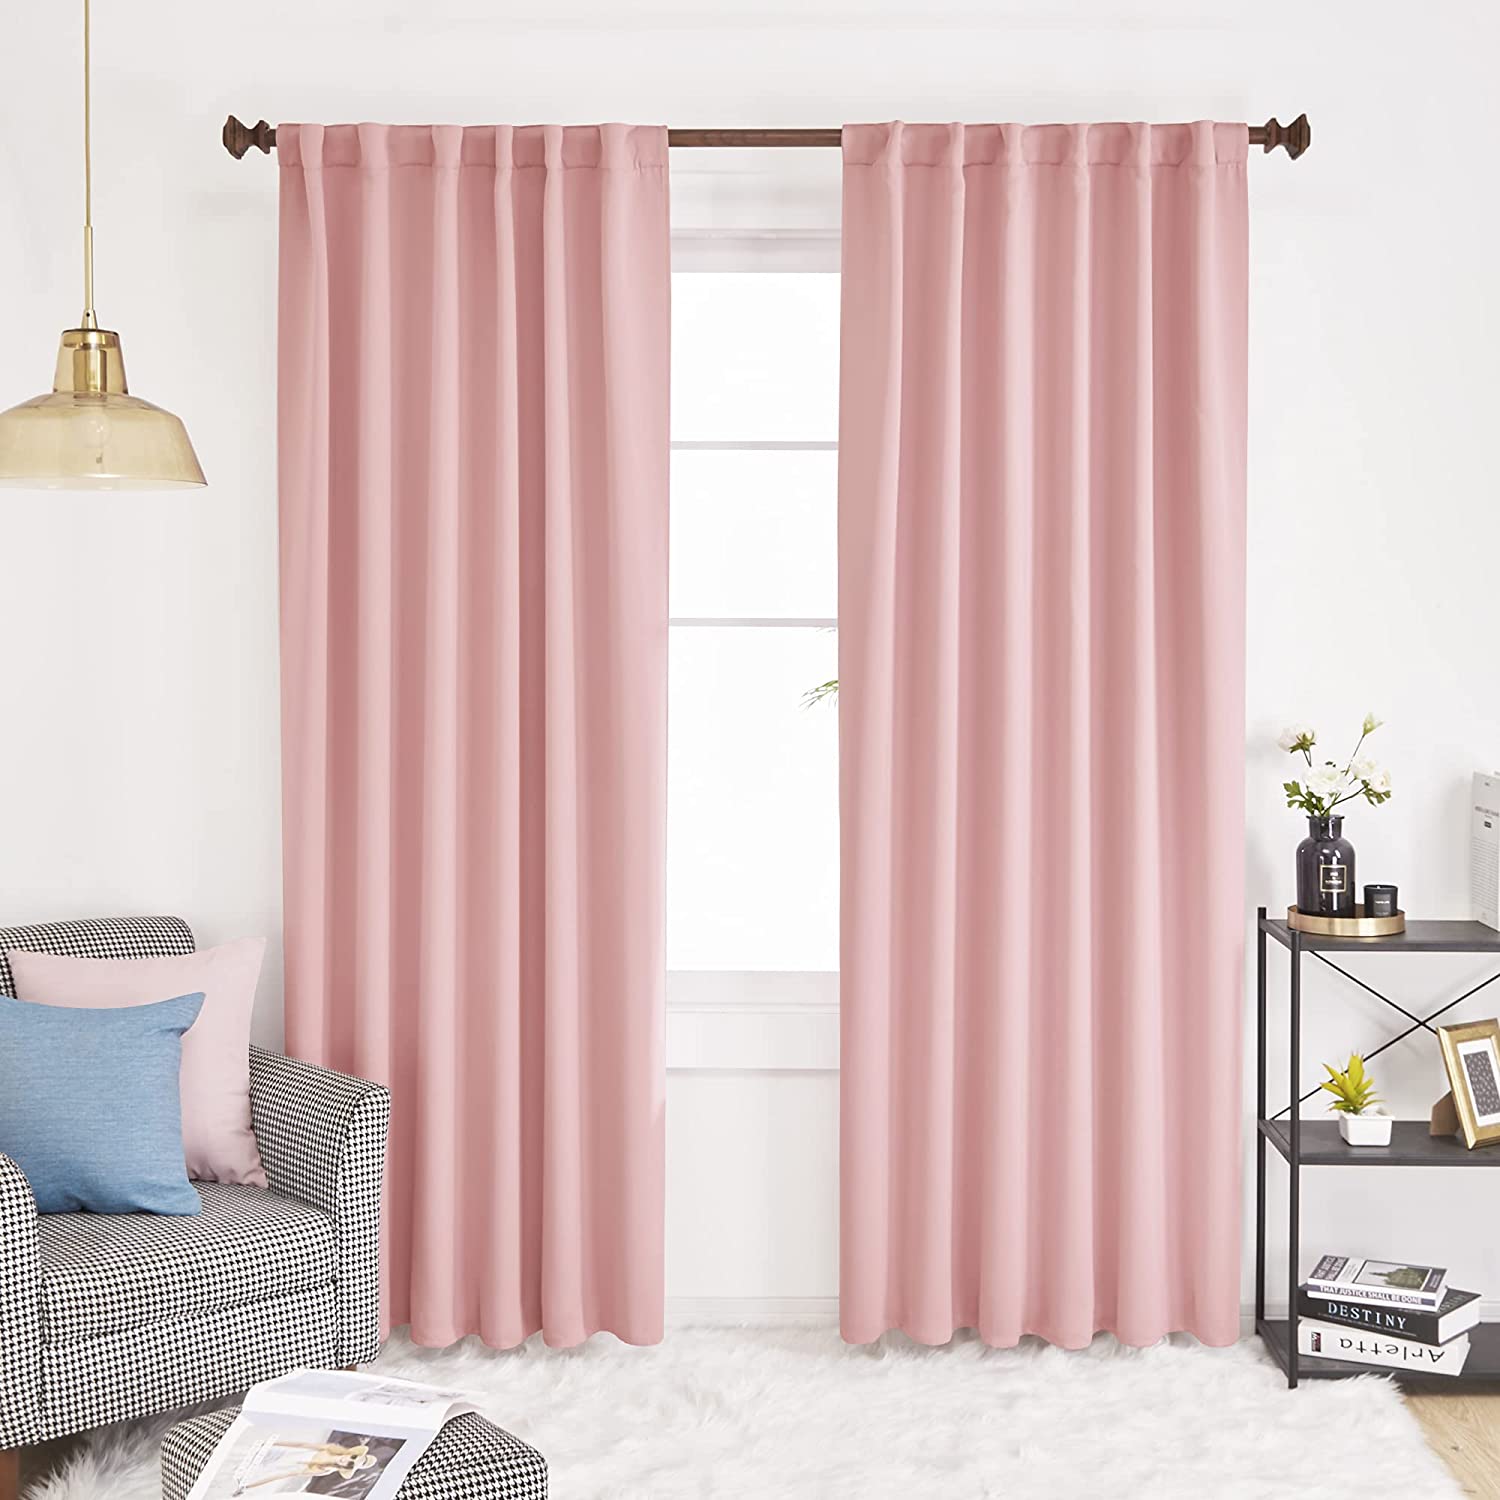 8. DECONOVO Solid Back Tab and Rod Pocket Curtains Closet Curtains